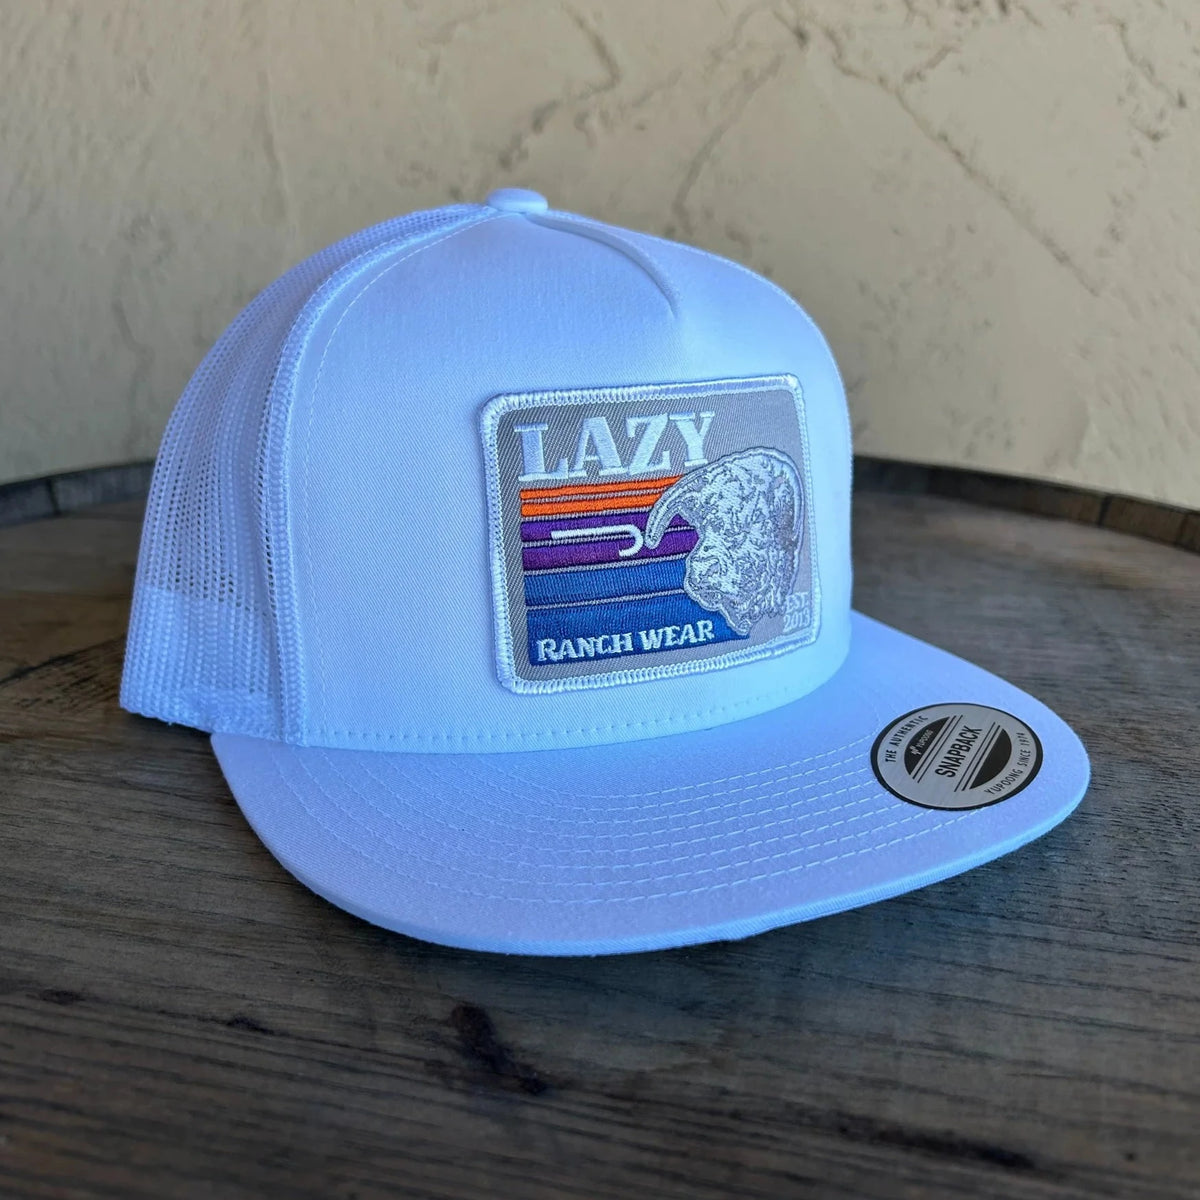 Lazy J Ranch Wear Solid White Sunset Bull Cap